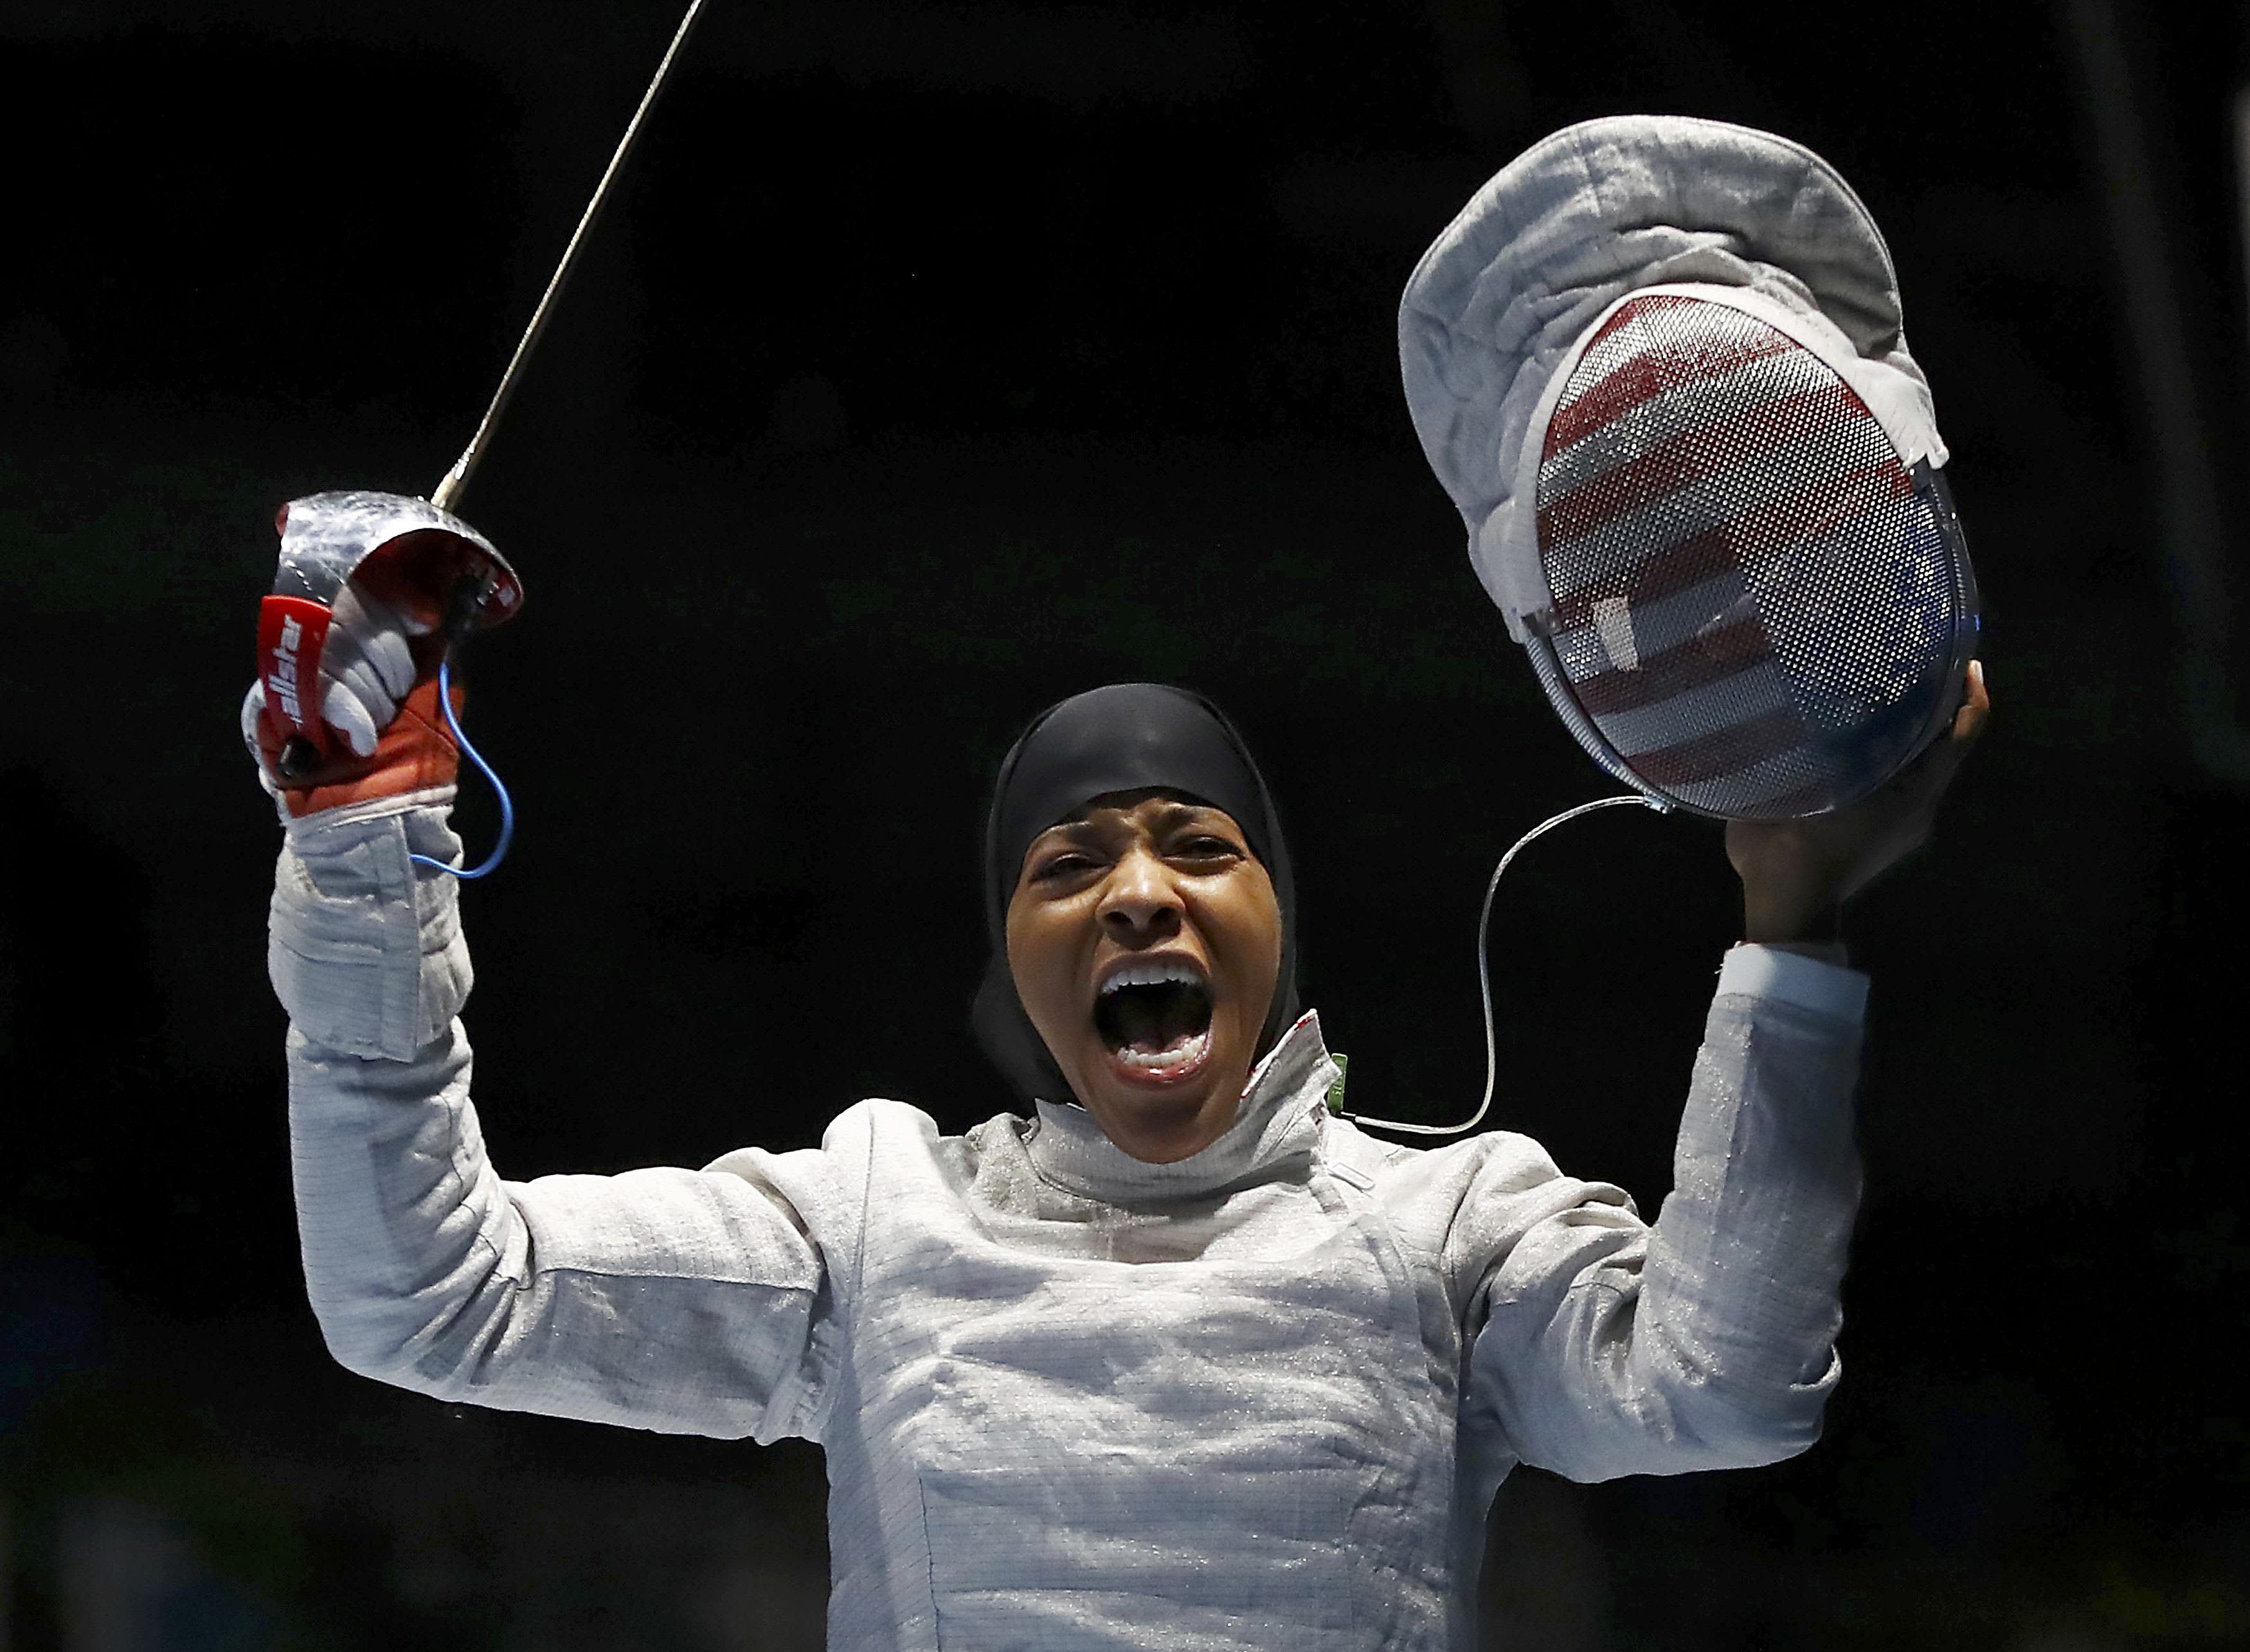 Muslim Fencer Represents Team USA At The Olympics And Beyond